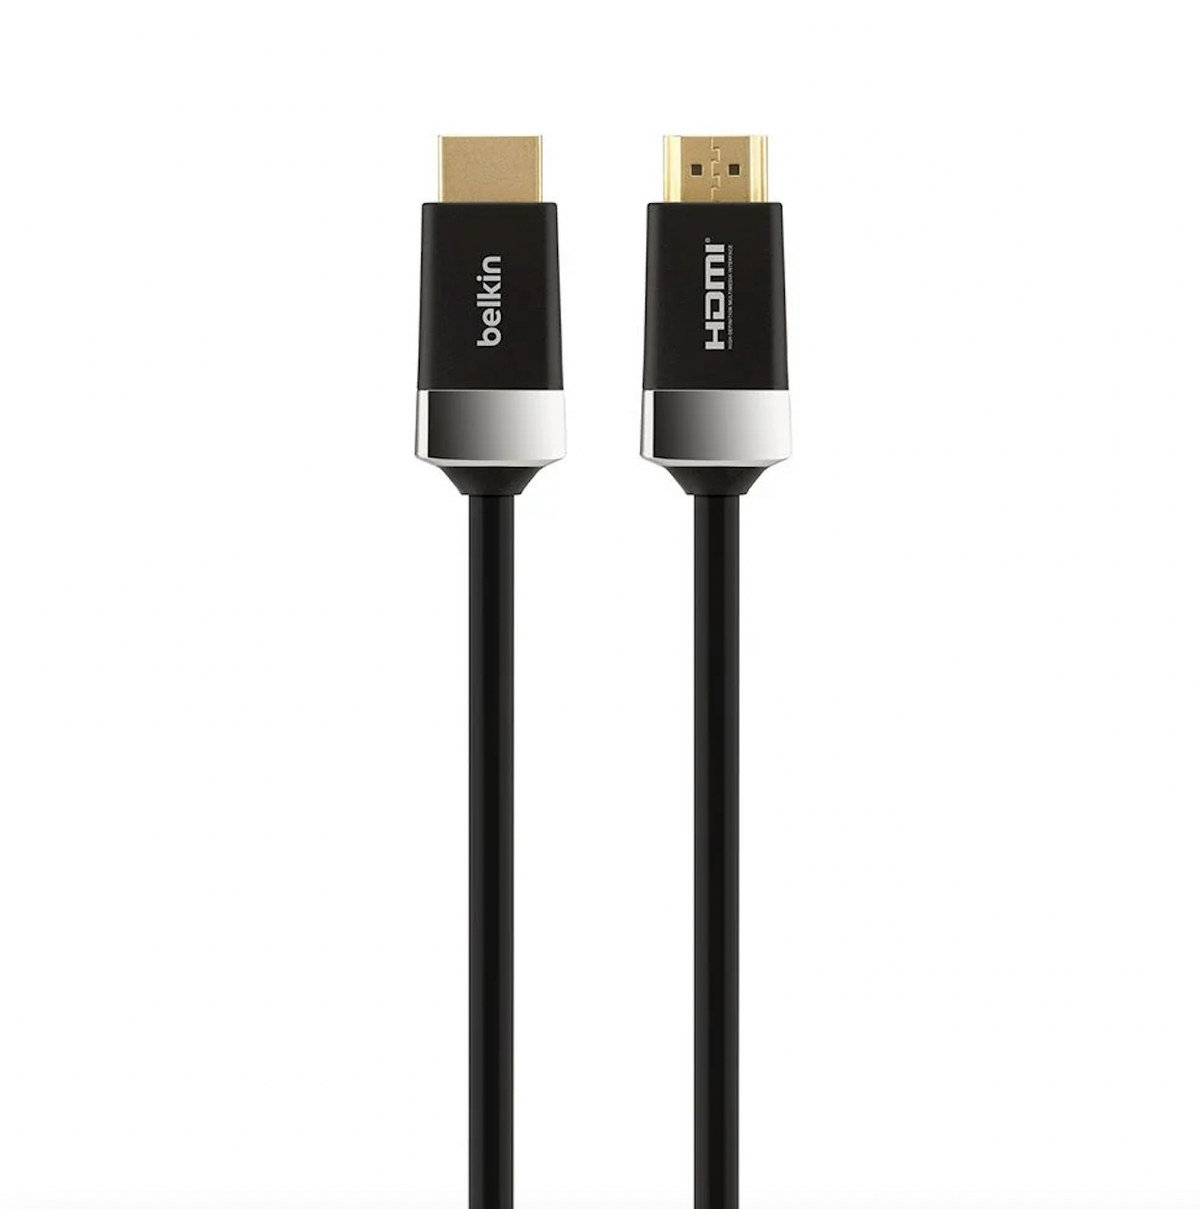 Belkin High Speed HDMI Cable HDMI (M) to HDMI (M) 2mts Black